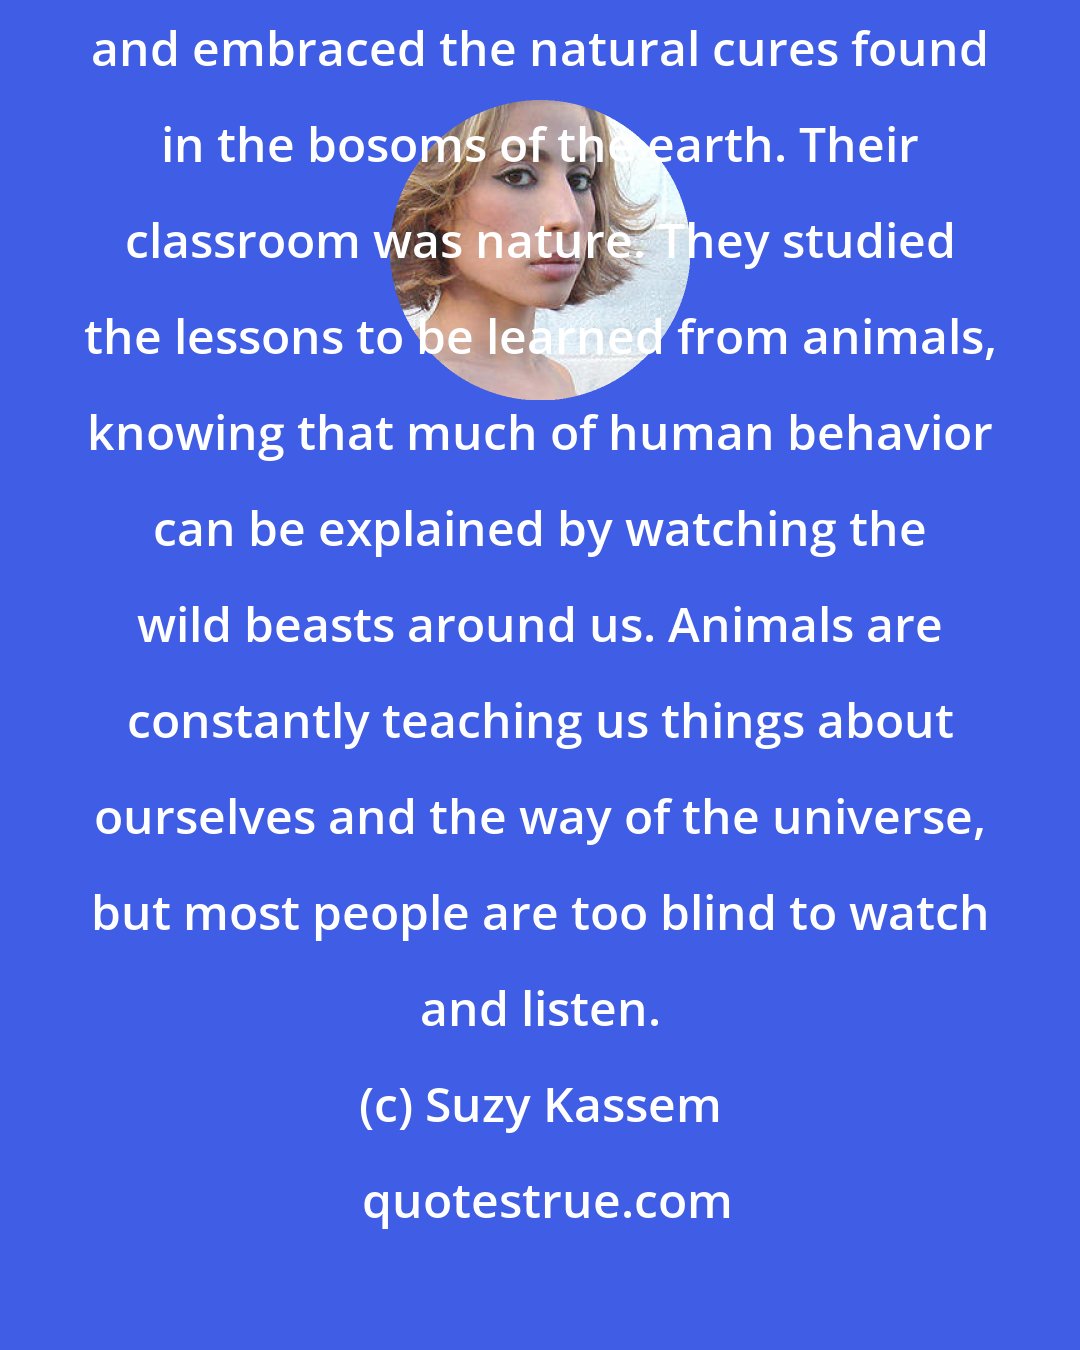 Suzy Kassem: A wealth of knowledge is openly accessible in nature. Our ancestors knew this and embraced the natural cures found in the bosoms of the earth. Their classroom was nature. They studied the lessons to be learned from animals, knowing that much of human behavior can be explained by watching the wild beasts around us. Animals are constantly teaching us things about ourselves and the way of the universe, but most people are too blind to watch and listen.